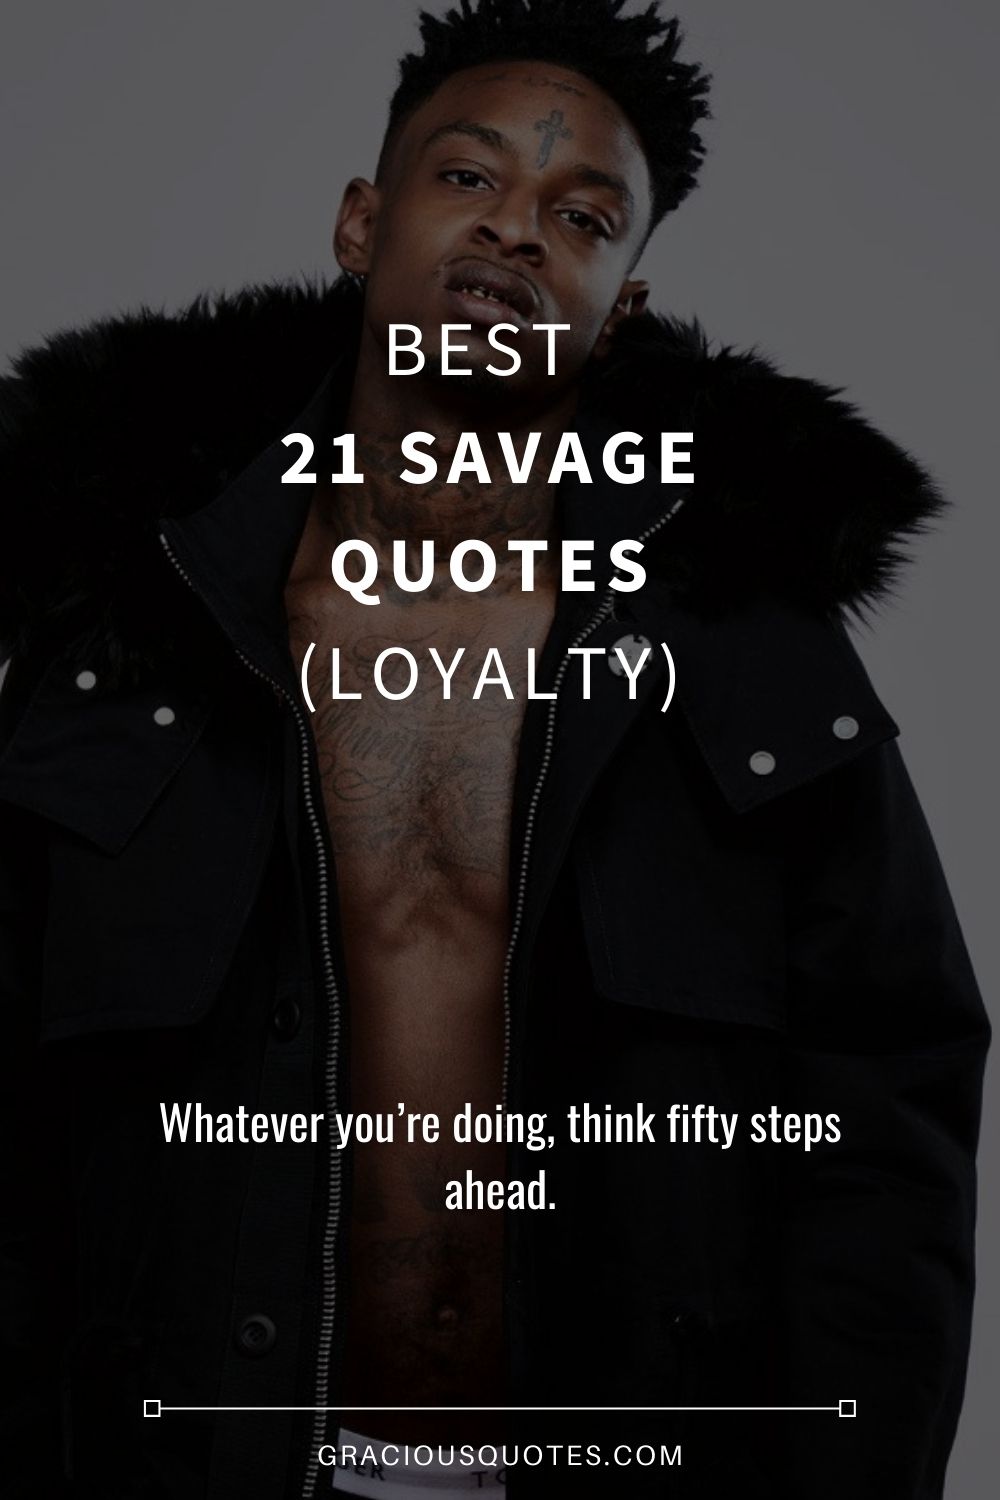 Best 21 Savage Quotes (LOYALTY) - Gracious Quotes